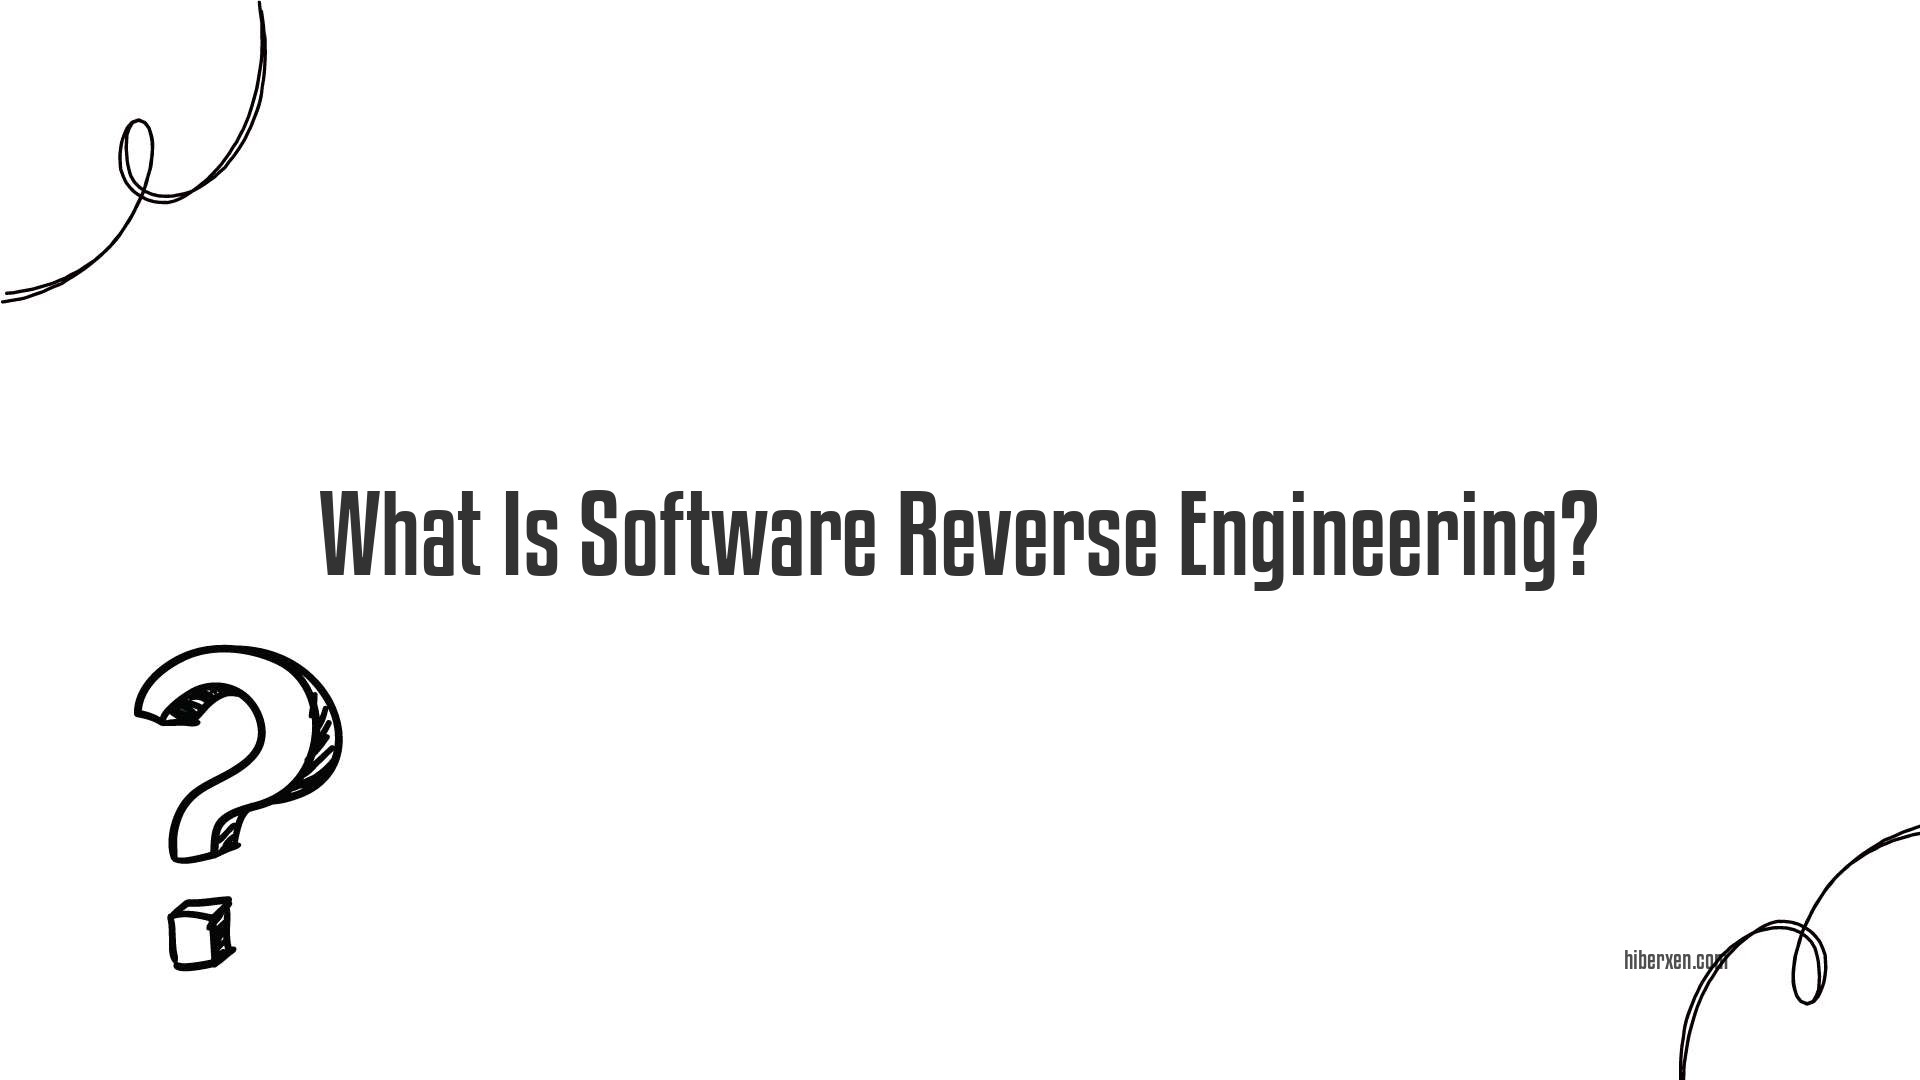 What Is Software Reverse Engineering?